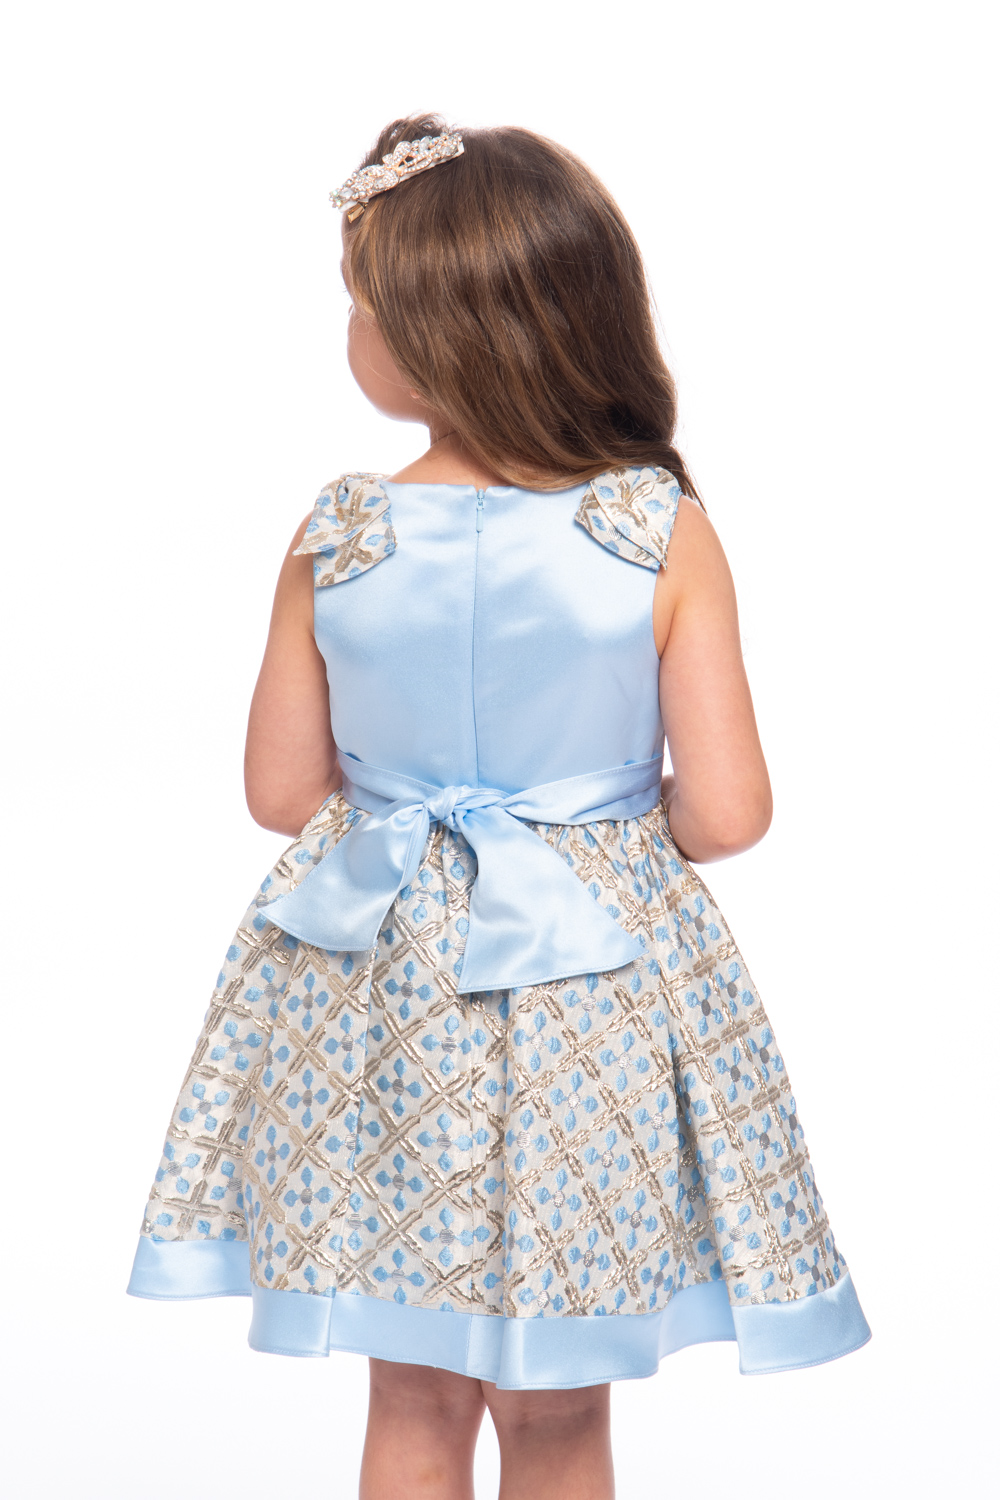 Baby Blue Flower Girl Gown